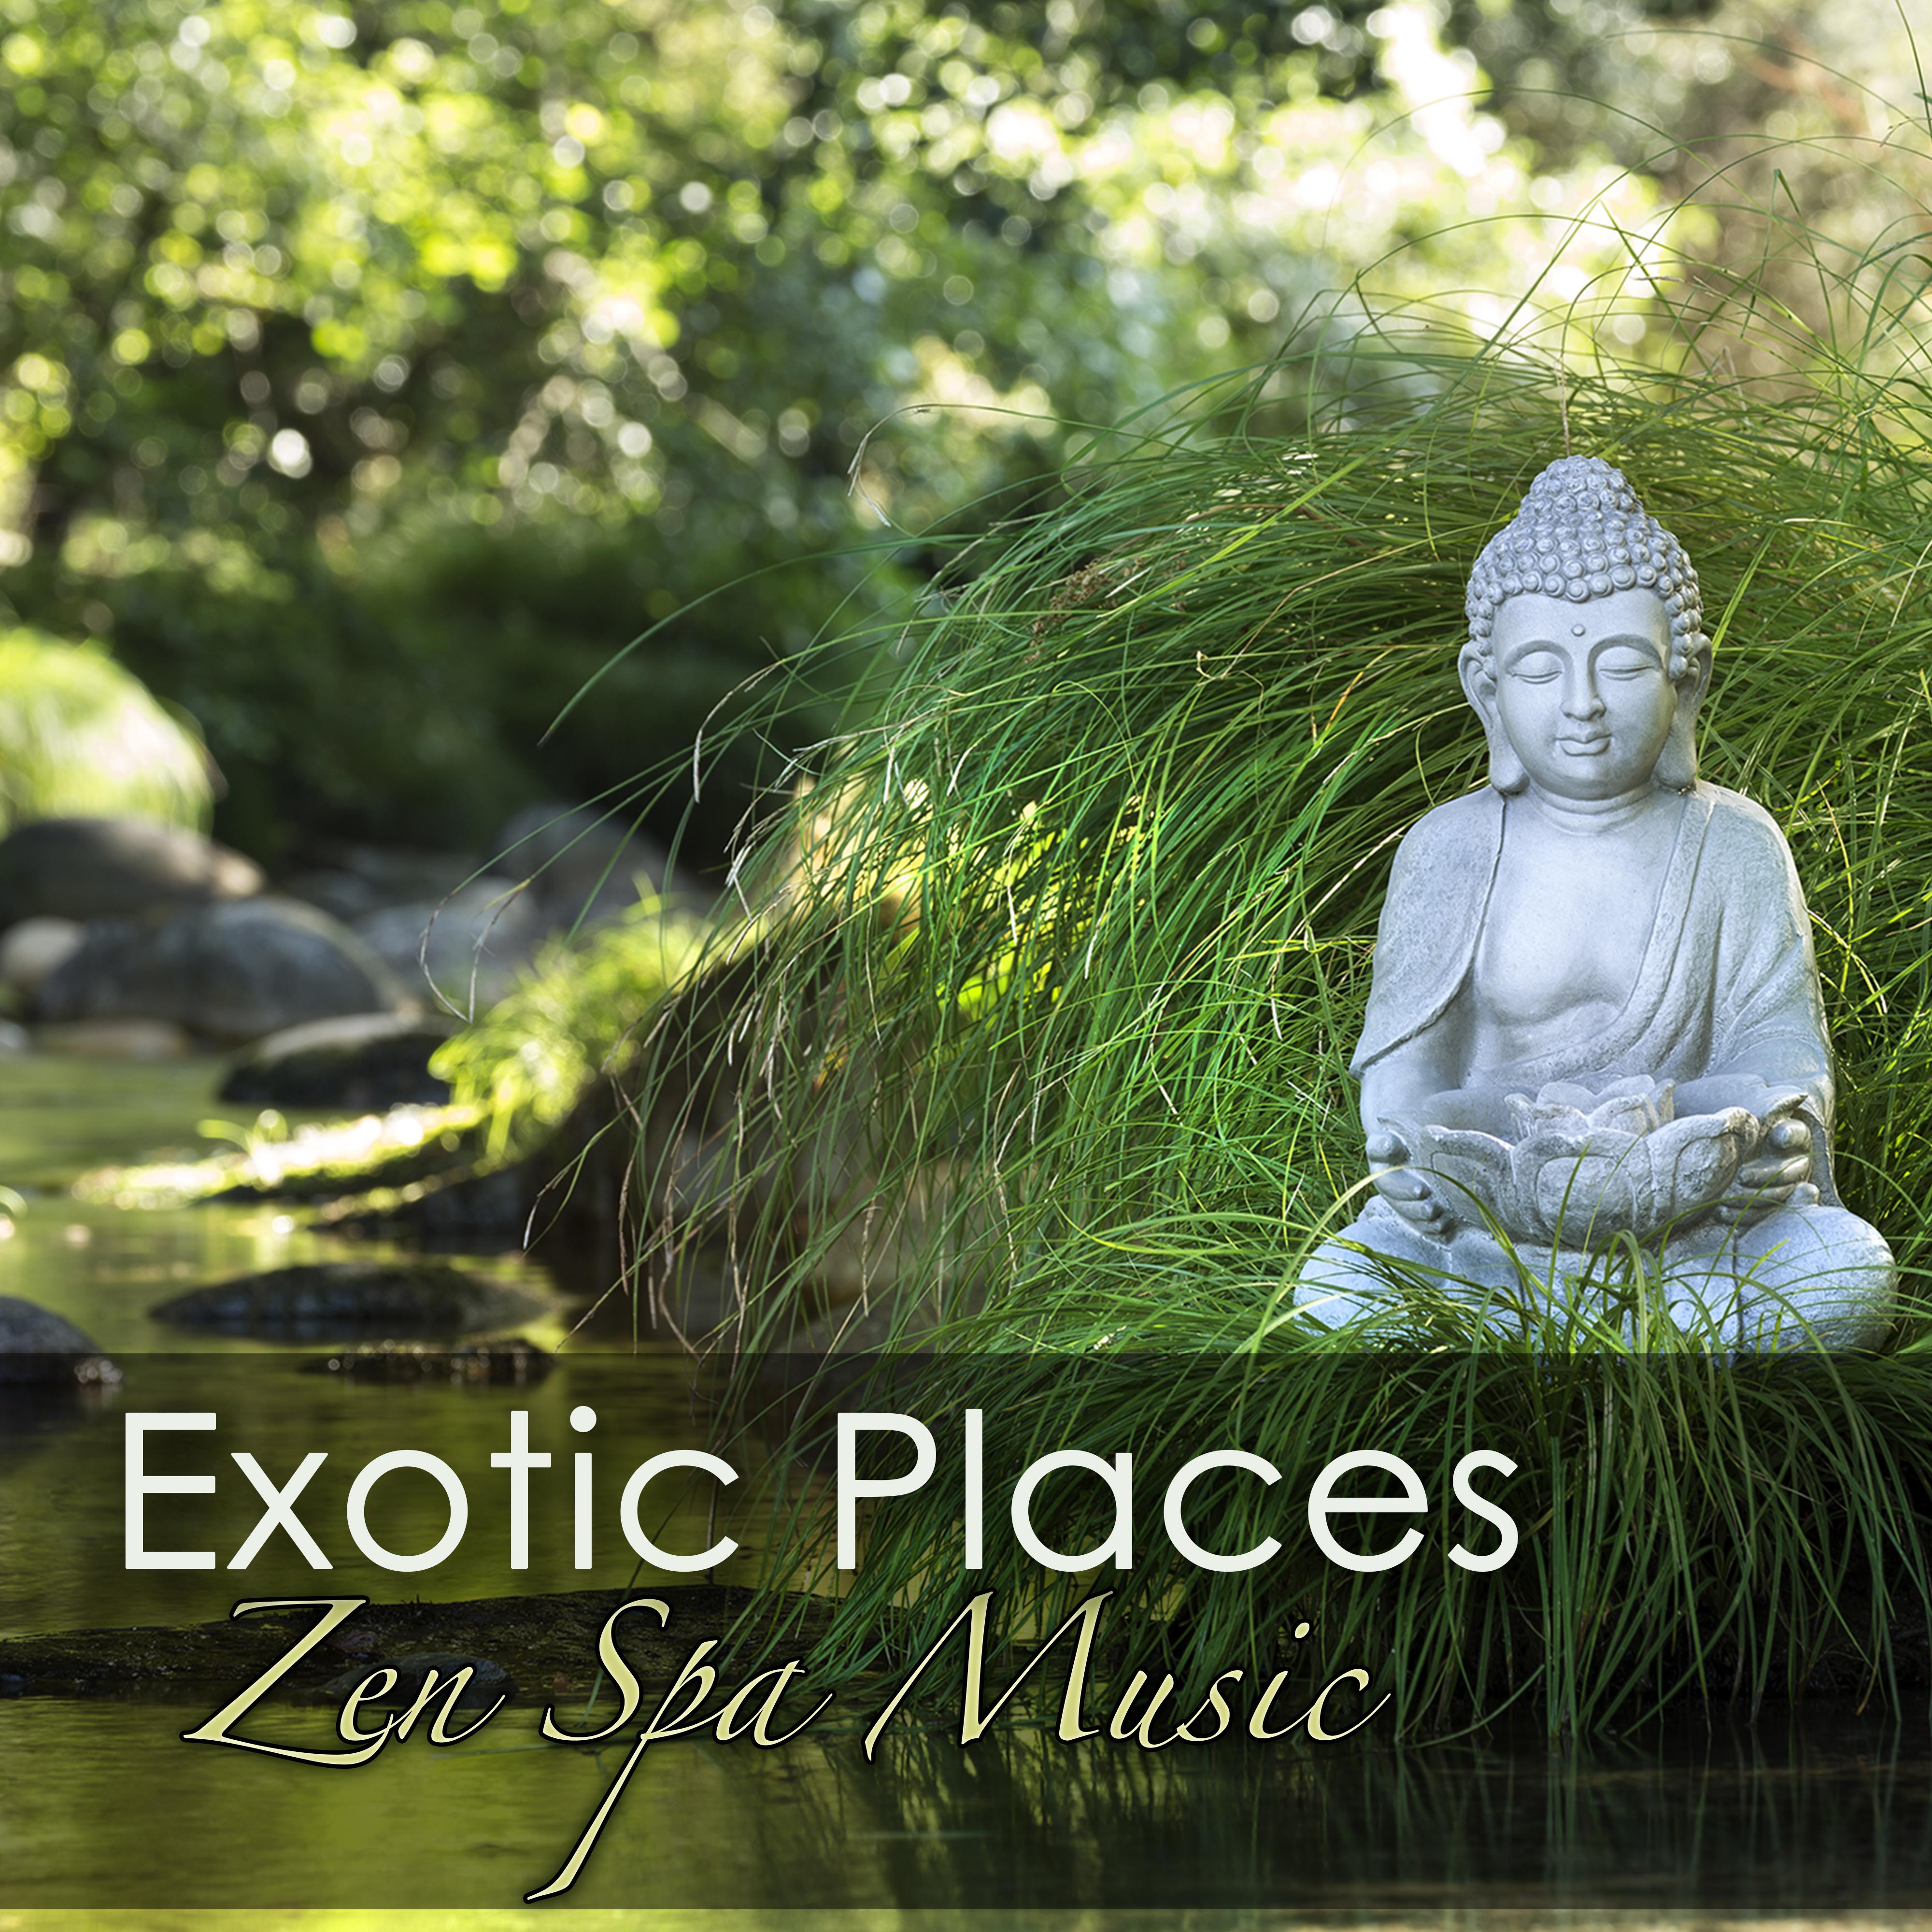 Exotic Places Zen Spa Music  Luxury Spa Songs for Massage, Spa Treatments, Holistic Health  Natural Beauty